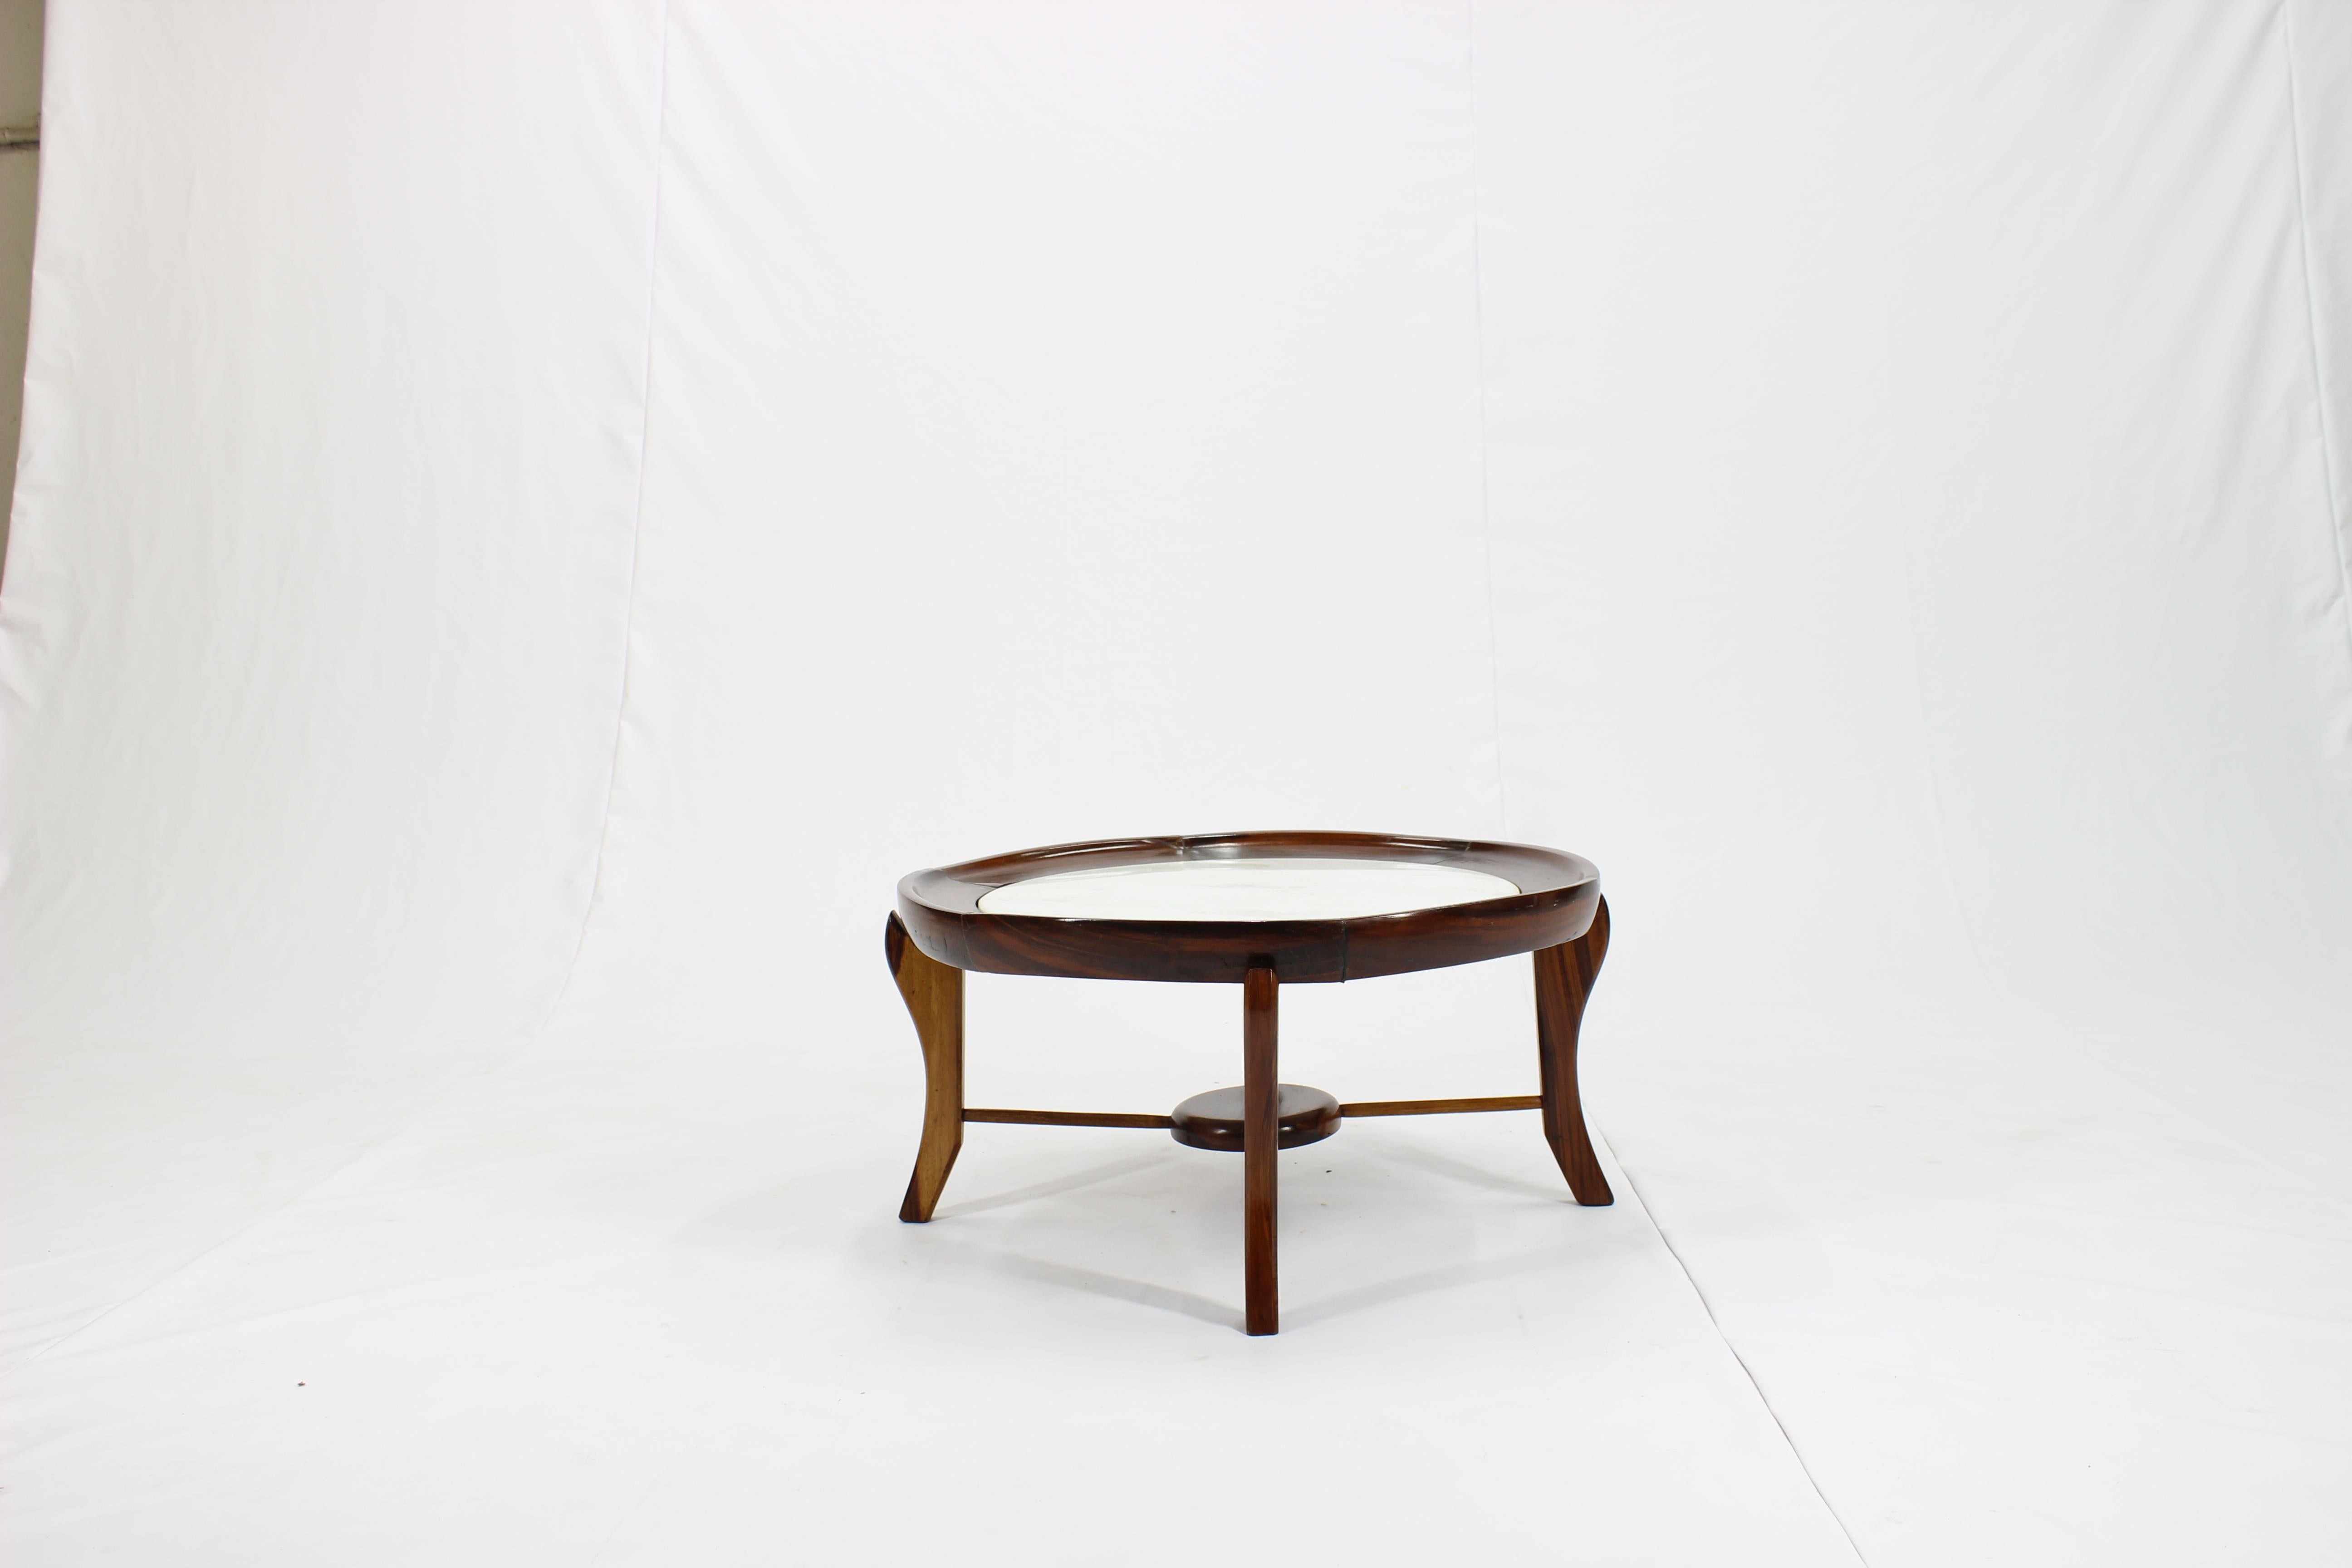 This circa 1960s 'Maracana' table attributed to designer Giuseppe Scapinelli, comes in rich Brazilian jacaranda wood, with marble top against a round concave frame, above uniquely formed cabriole legs, with spreaders joined by a central lower tier.